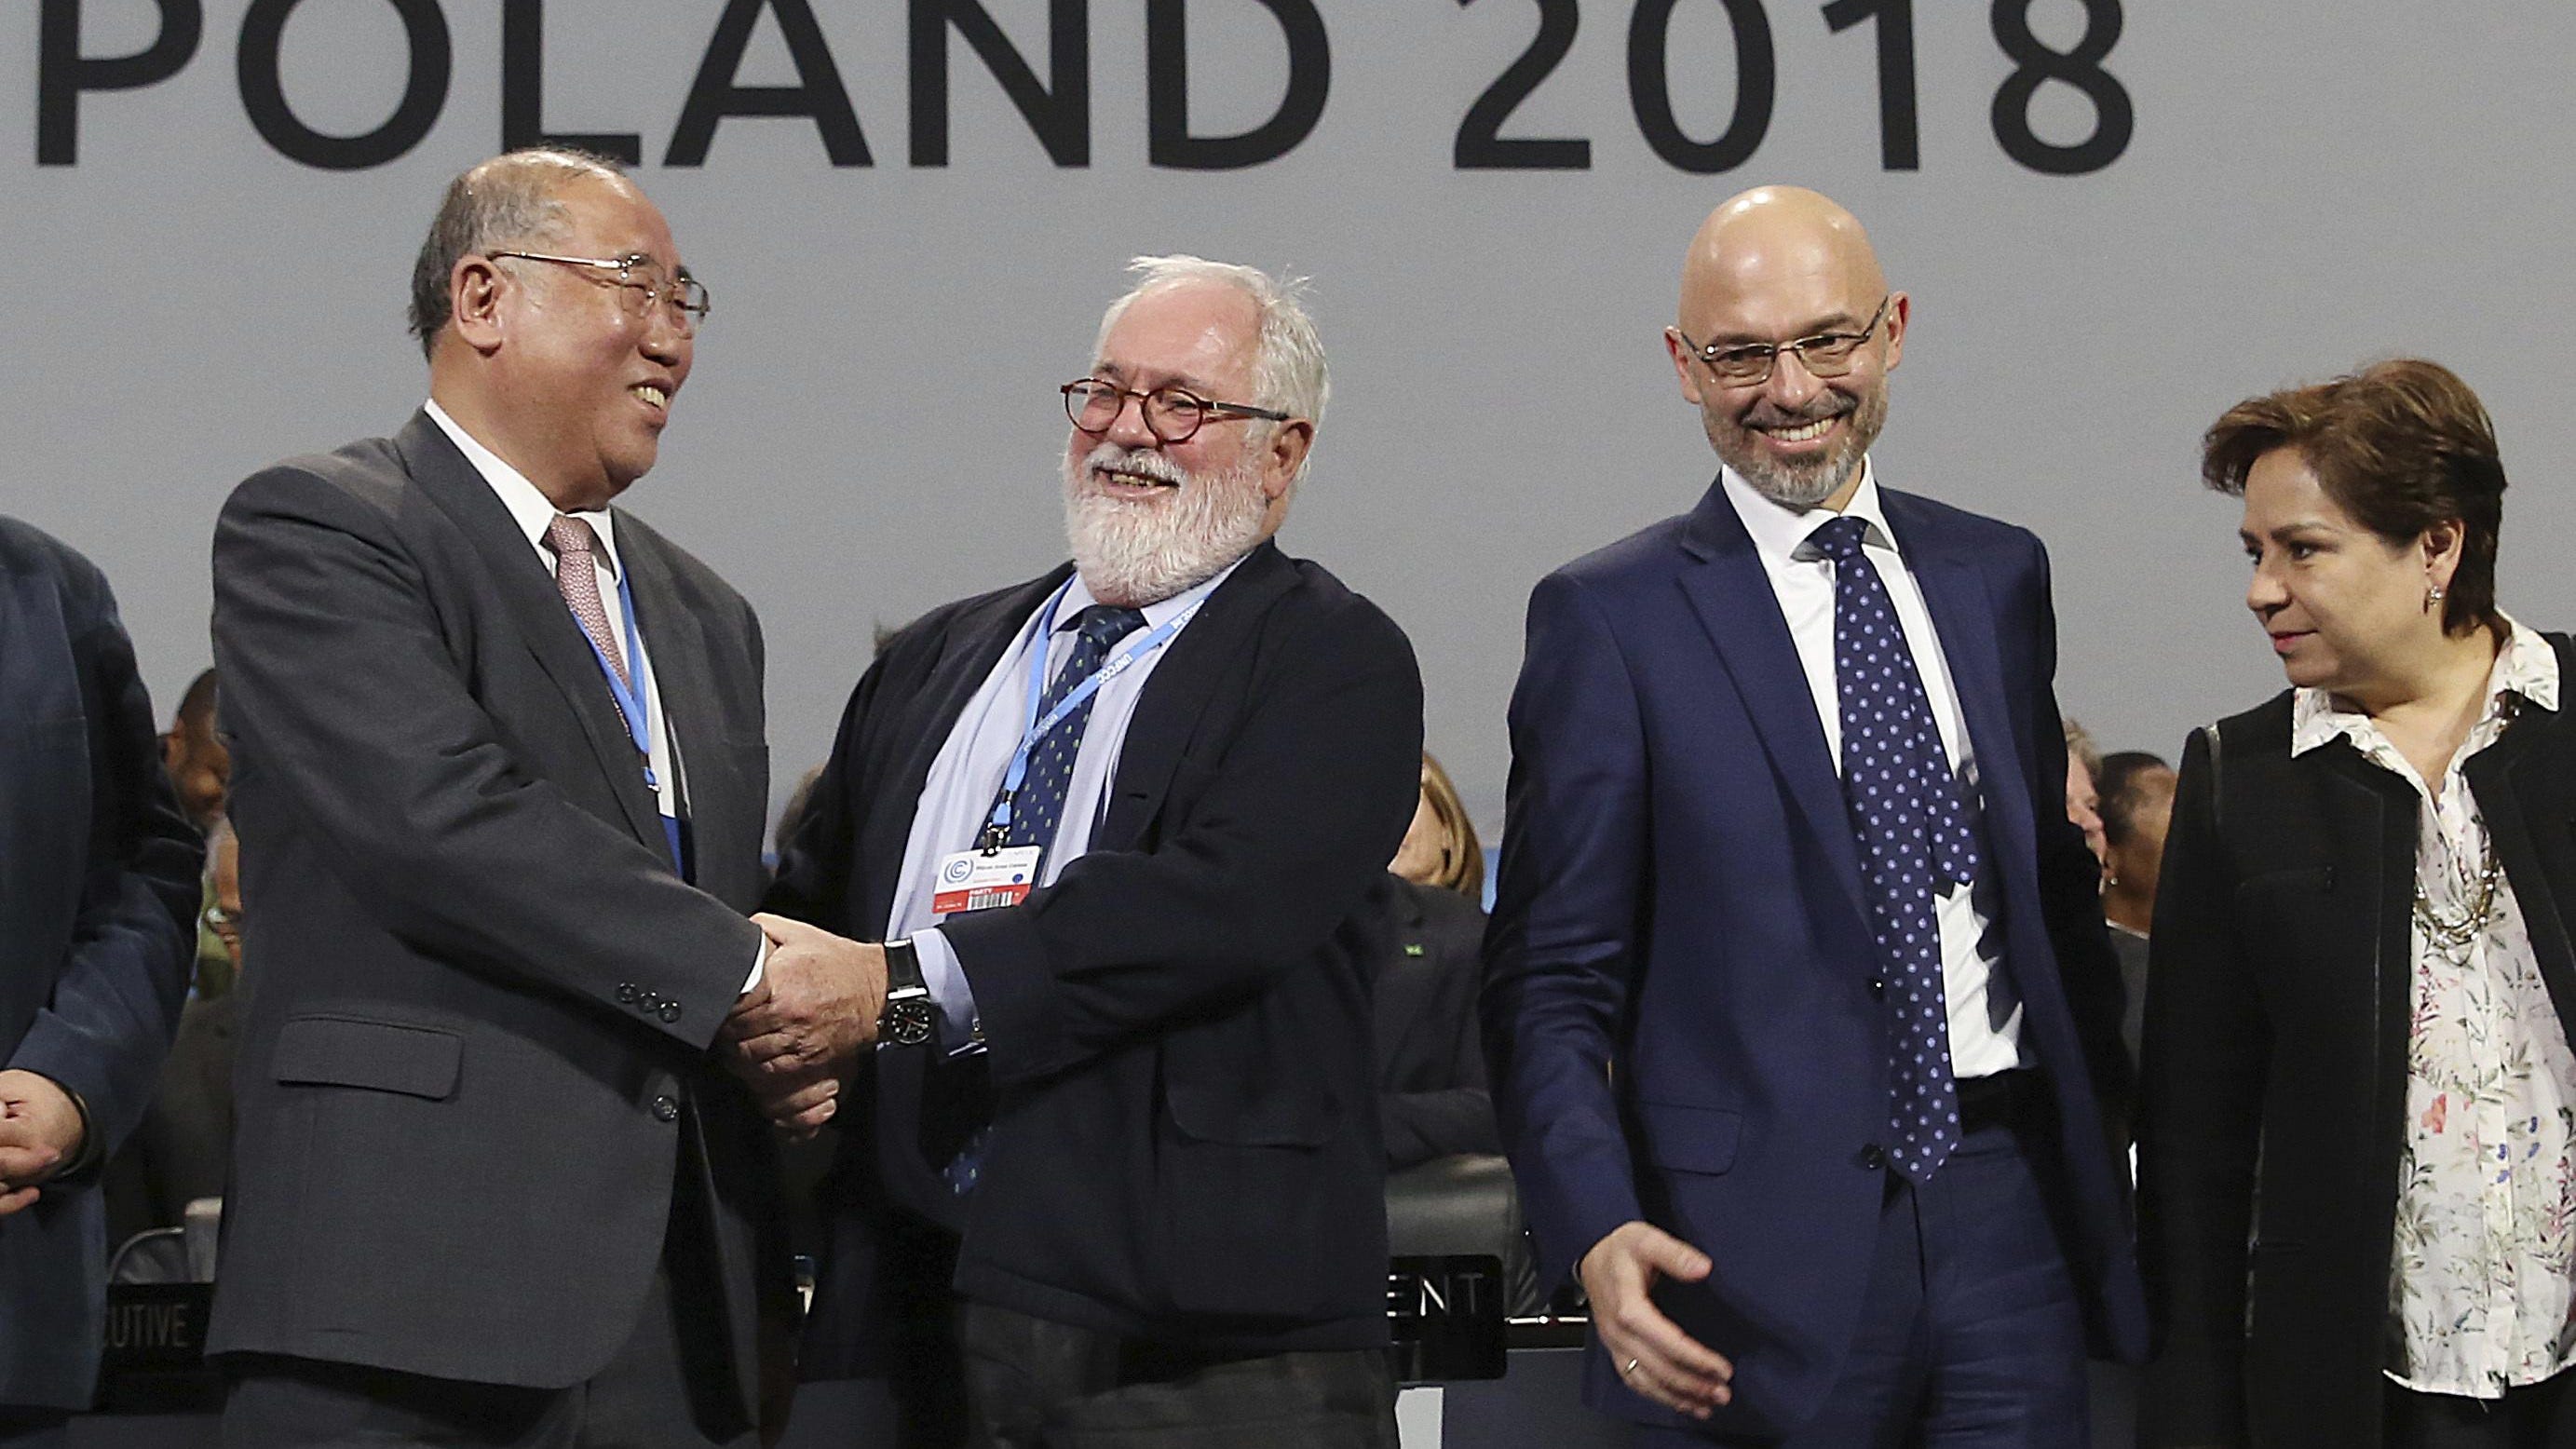 Heads of the delegations react at the end of the final session of the COP24 summit on climate changein Katowice, Poland, Saturday, Dec. 15, 2018.